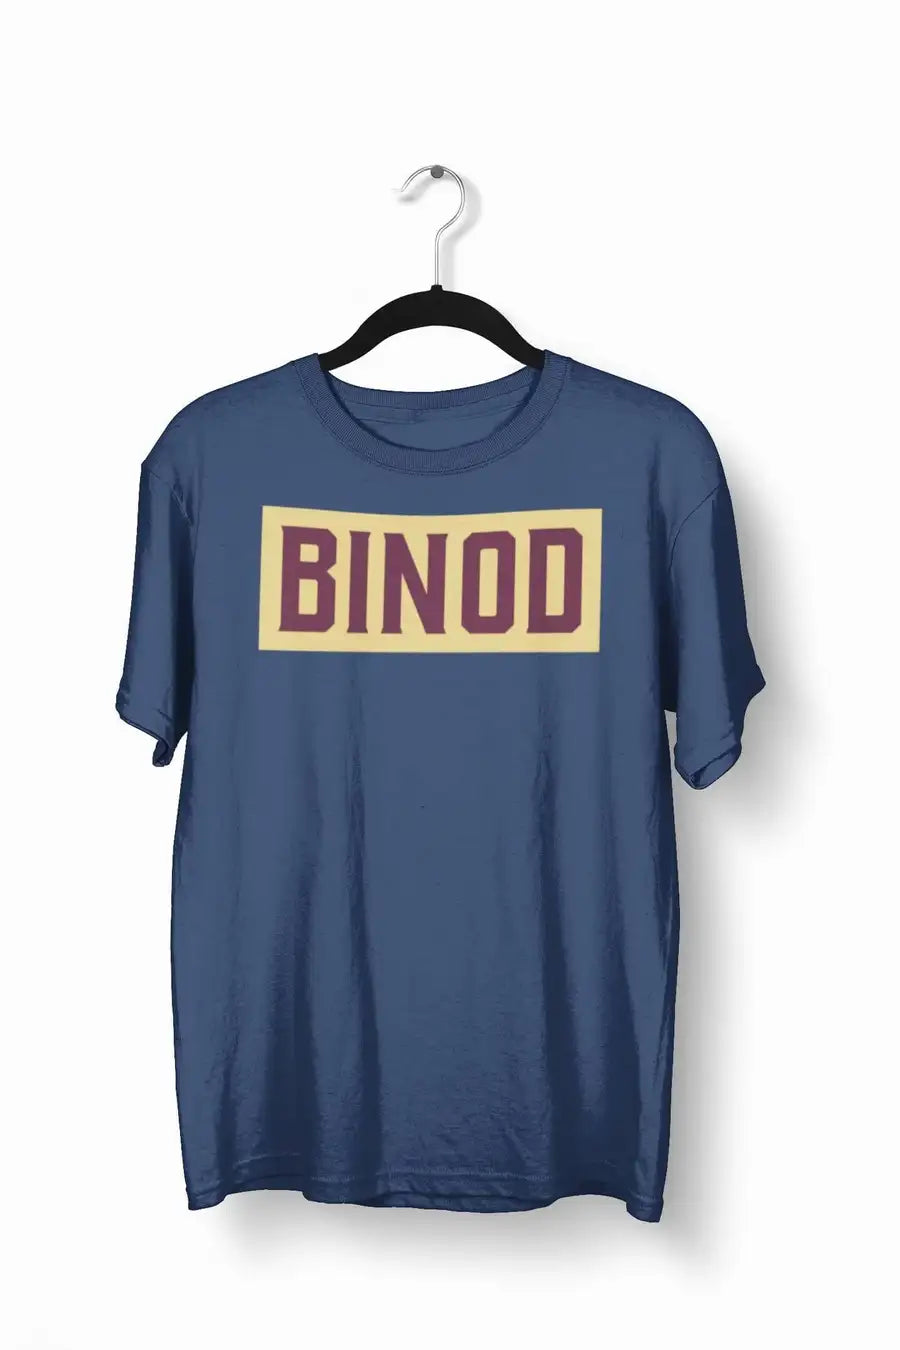 Binod Comment Exclusive T Shirt | Premium Design | Catch My Drift India - Catch My Drift India Clothing black, bollywood, clothing, funny, made in india, shirt, t shirt, trending, tshirt, whi